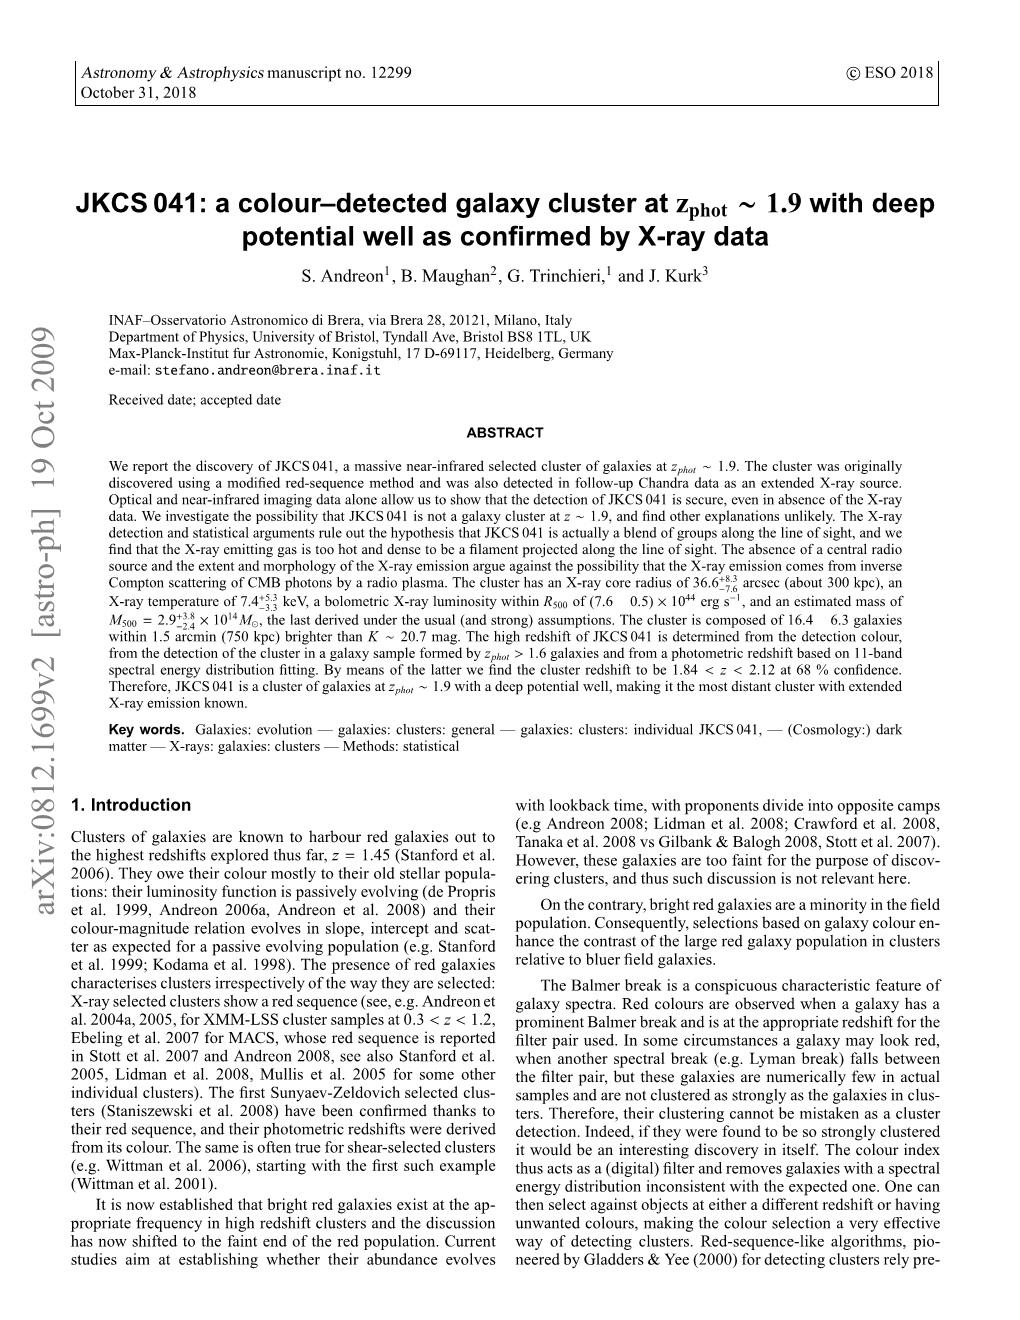 JKCS 041: a Colour–Detected Galaxy Cluster at Zphot ∼ 1.9 With